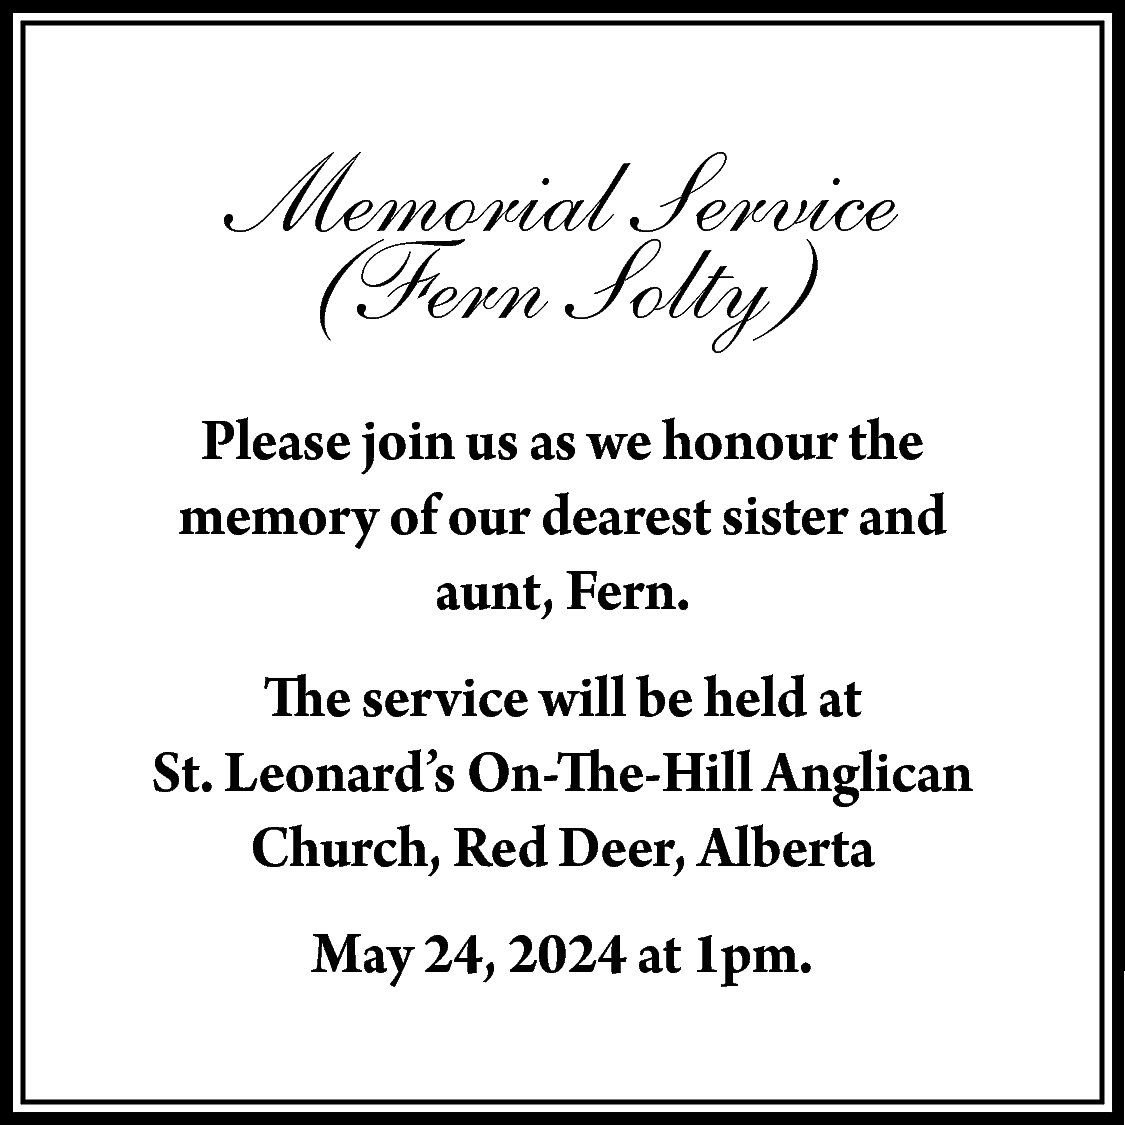 Memorial Service <br>(Fern Solty) <br>Please  Memorial Service  (Fern Solty)  Please join us as we honour the  memory of our dearest sister and  aunt, Fern.  The service will be held at  St. Leonard’s On-The-Hill Anglican  Church, Red Deer, Alberta  May 24, 2024 at 1pm.    